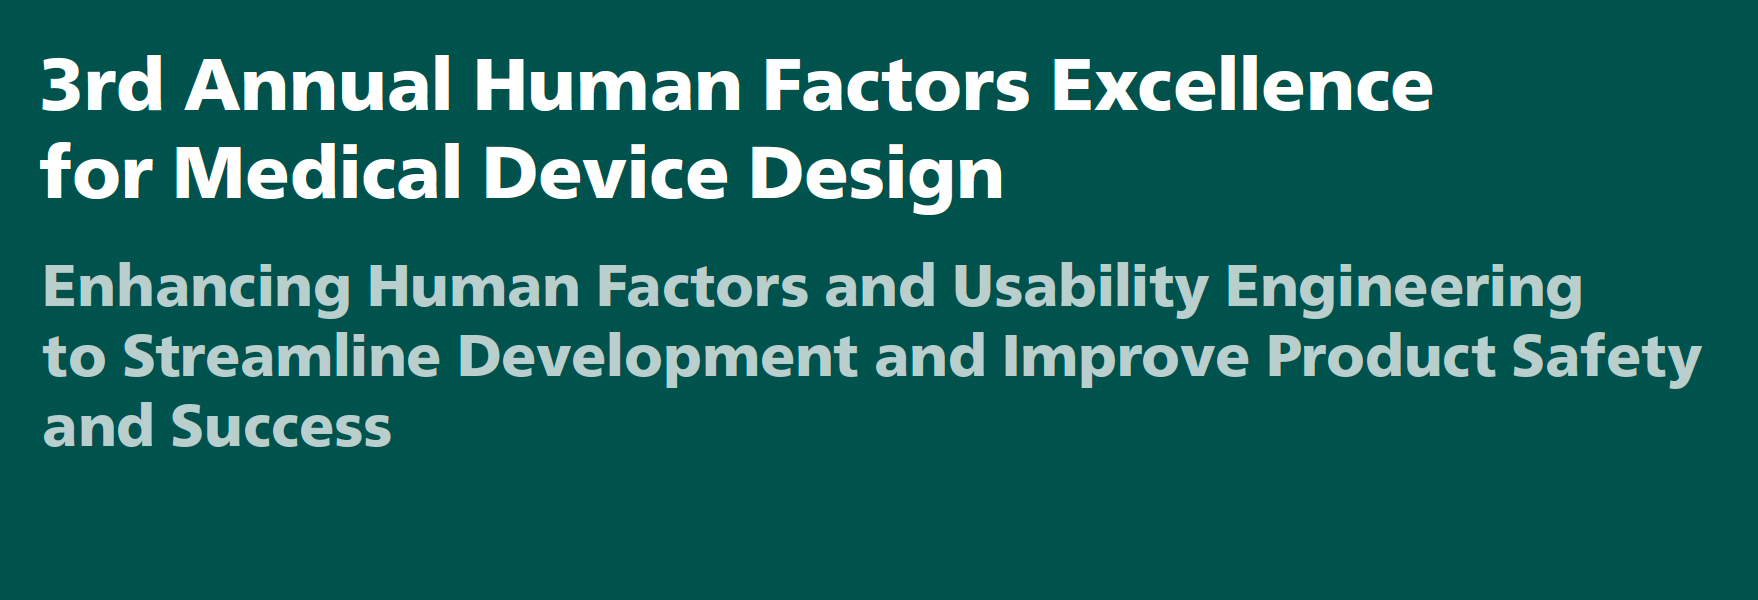 Picture shows the title of "3rd Annual Human Factors Excellence for Medical Device Design" and "Enhancing human factors and usability engineering to streamline development and improve product safety and success"